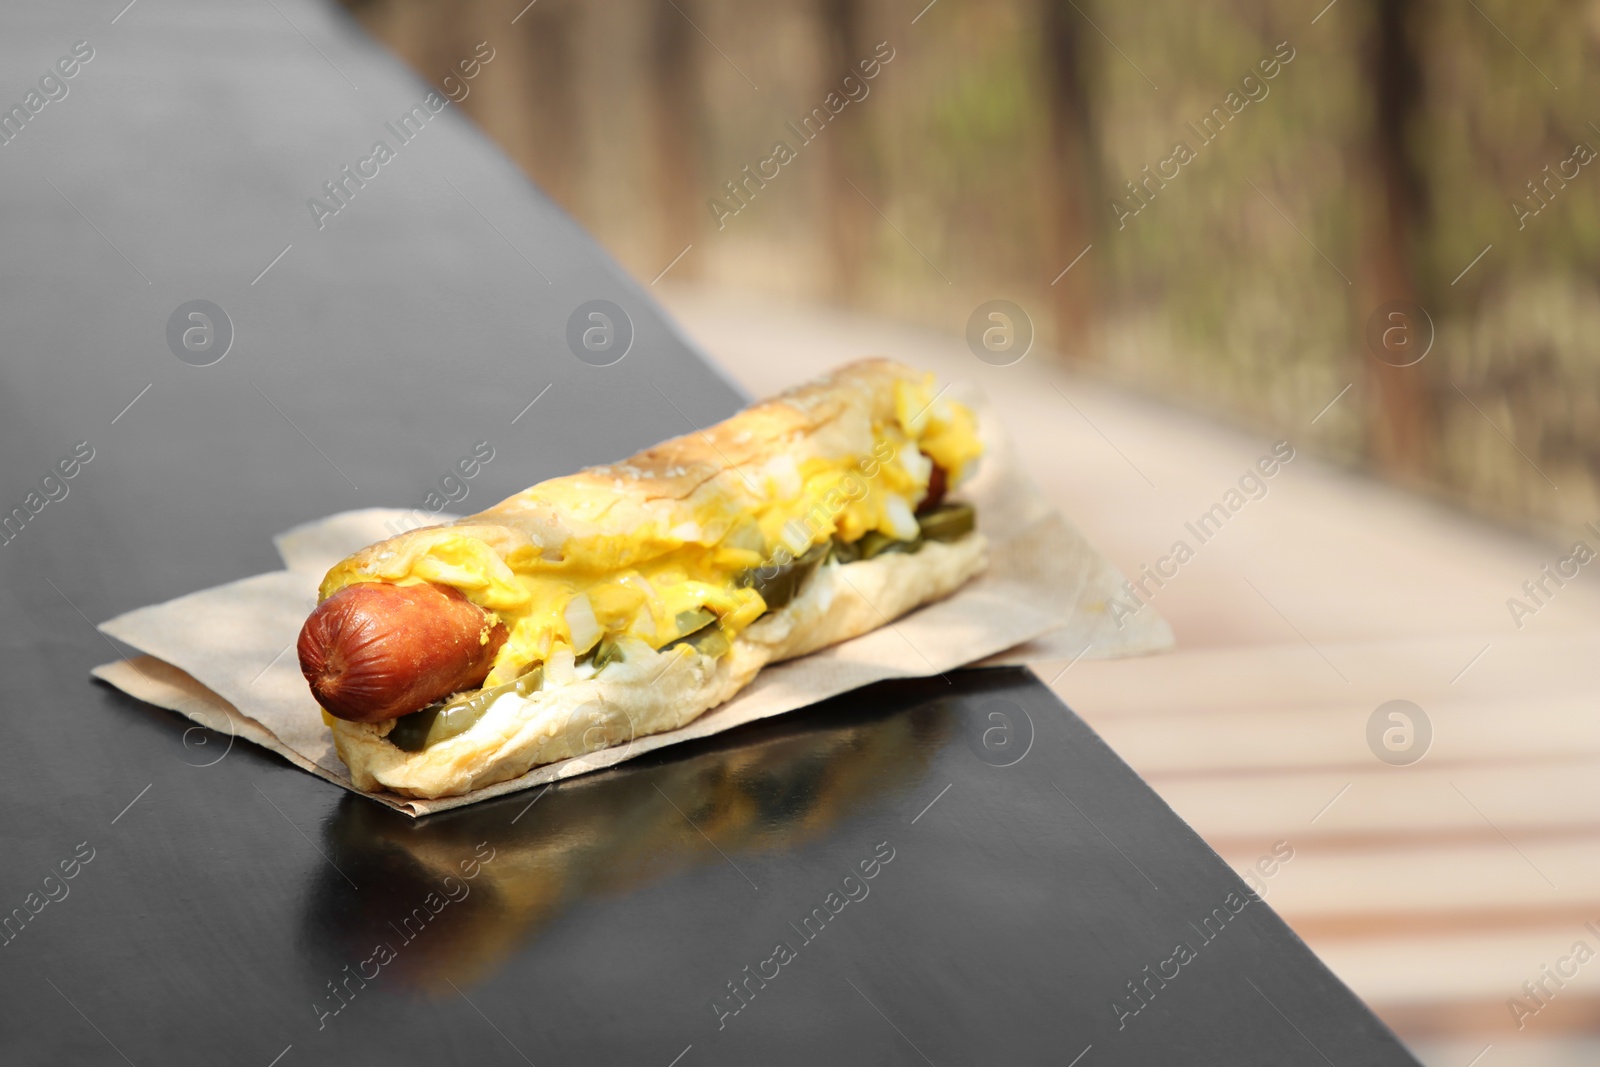 Photo of Fresh tasty hot dog with sauce on dark surface outdoors